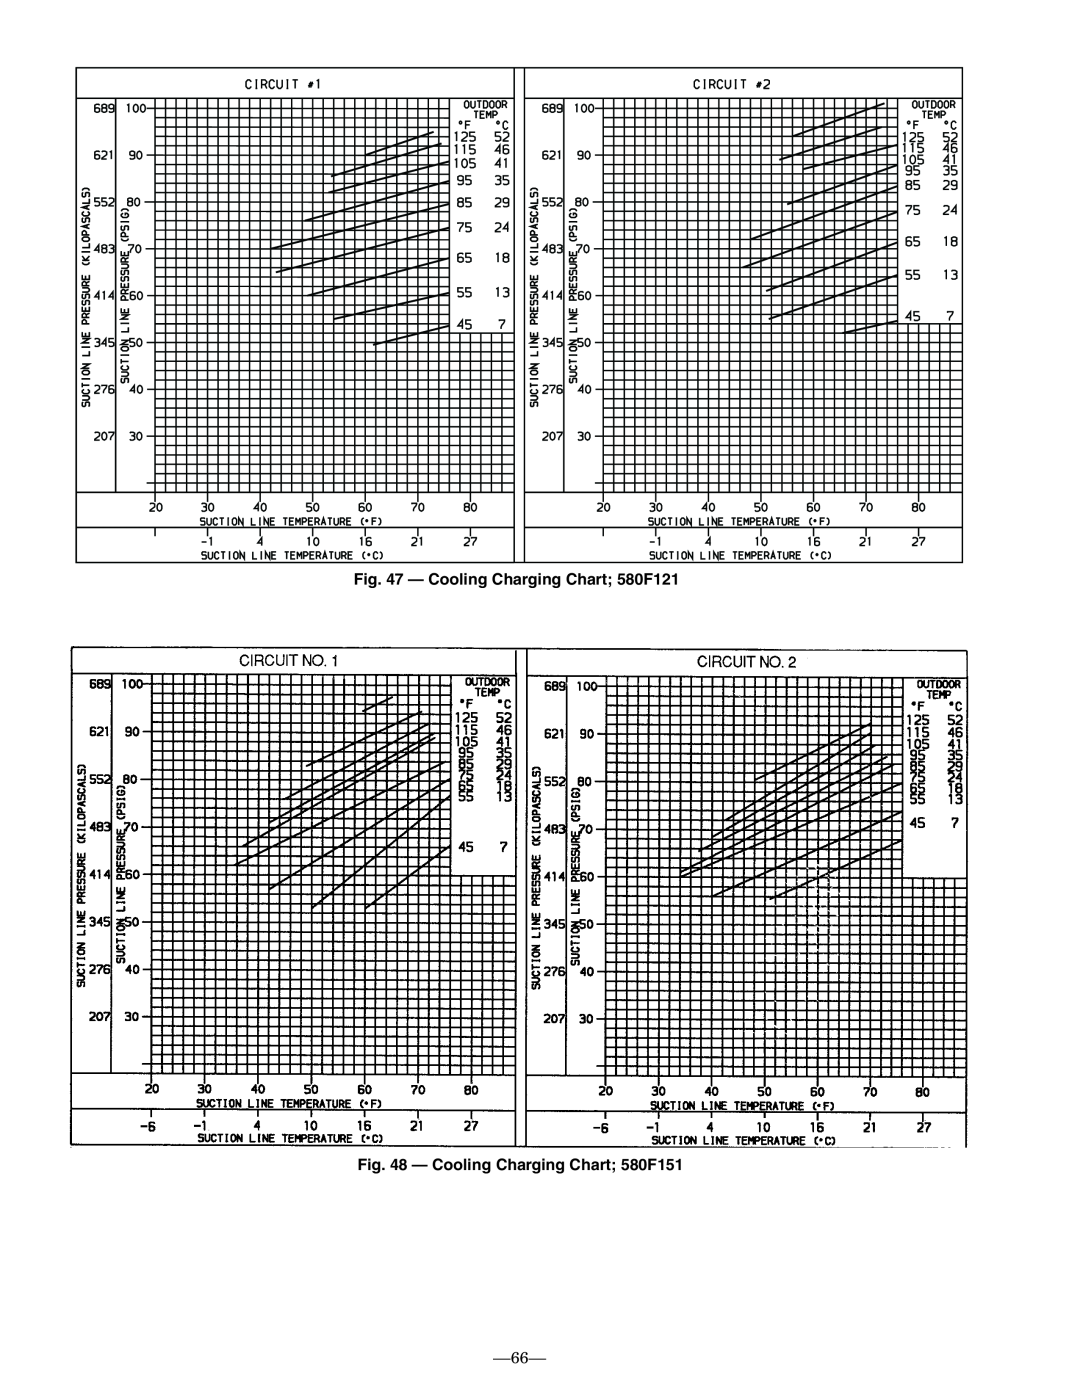 Bryant installation instructions 66, Cooling Charging Chart; 580F121, Cooling Charging Chart; 580F151 